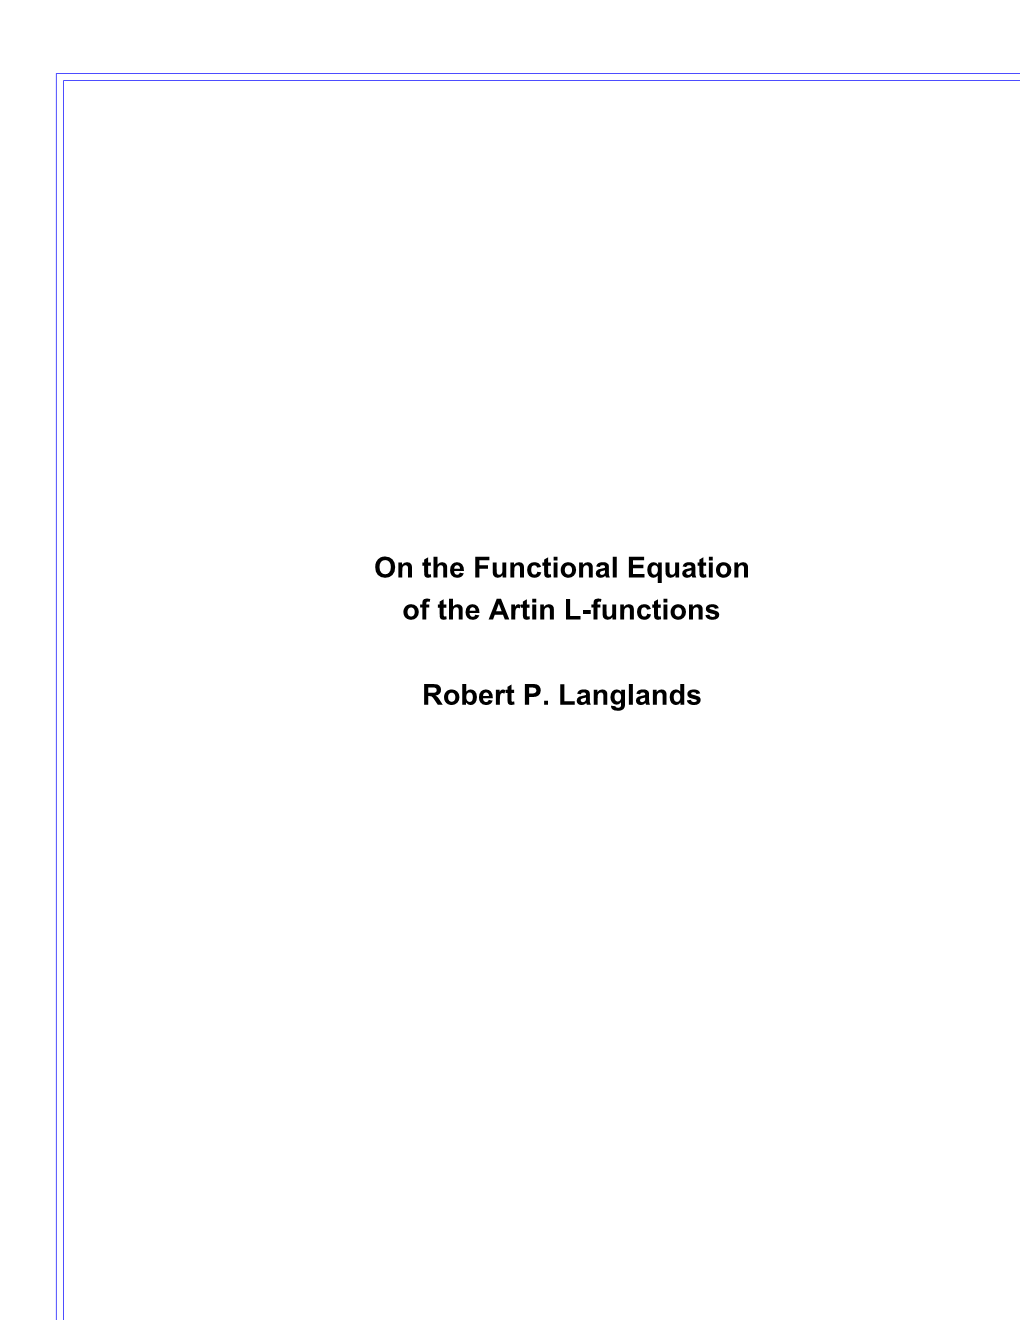 On the Functional Equation of the Artin L-Functions Robert P. Langlands